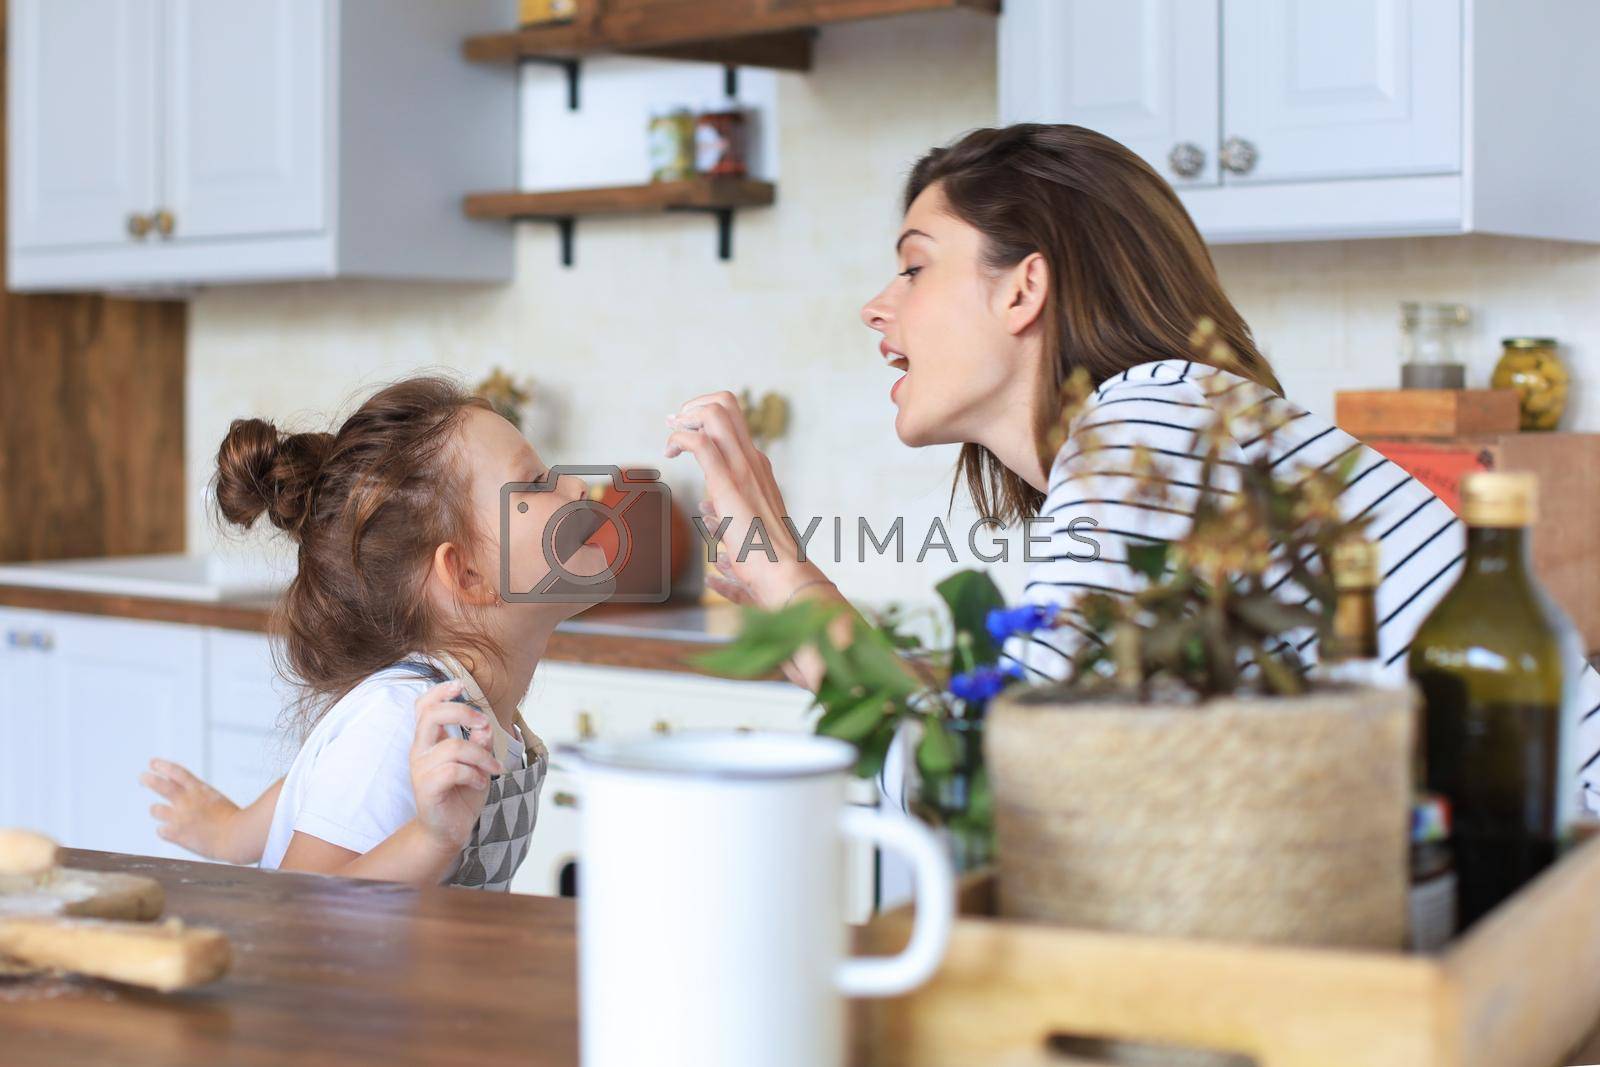 Royalty free image of Playful little girl cooking at kitchen with her loving mother. by tsyhun